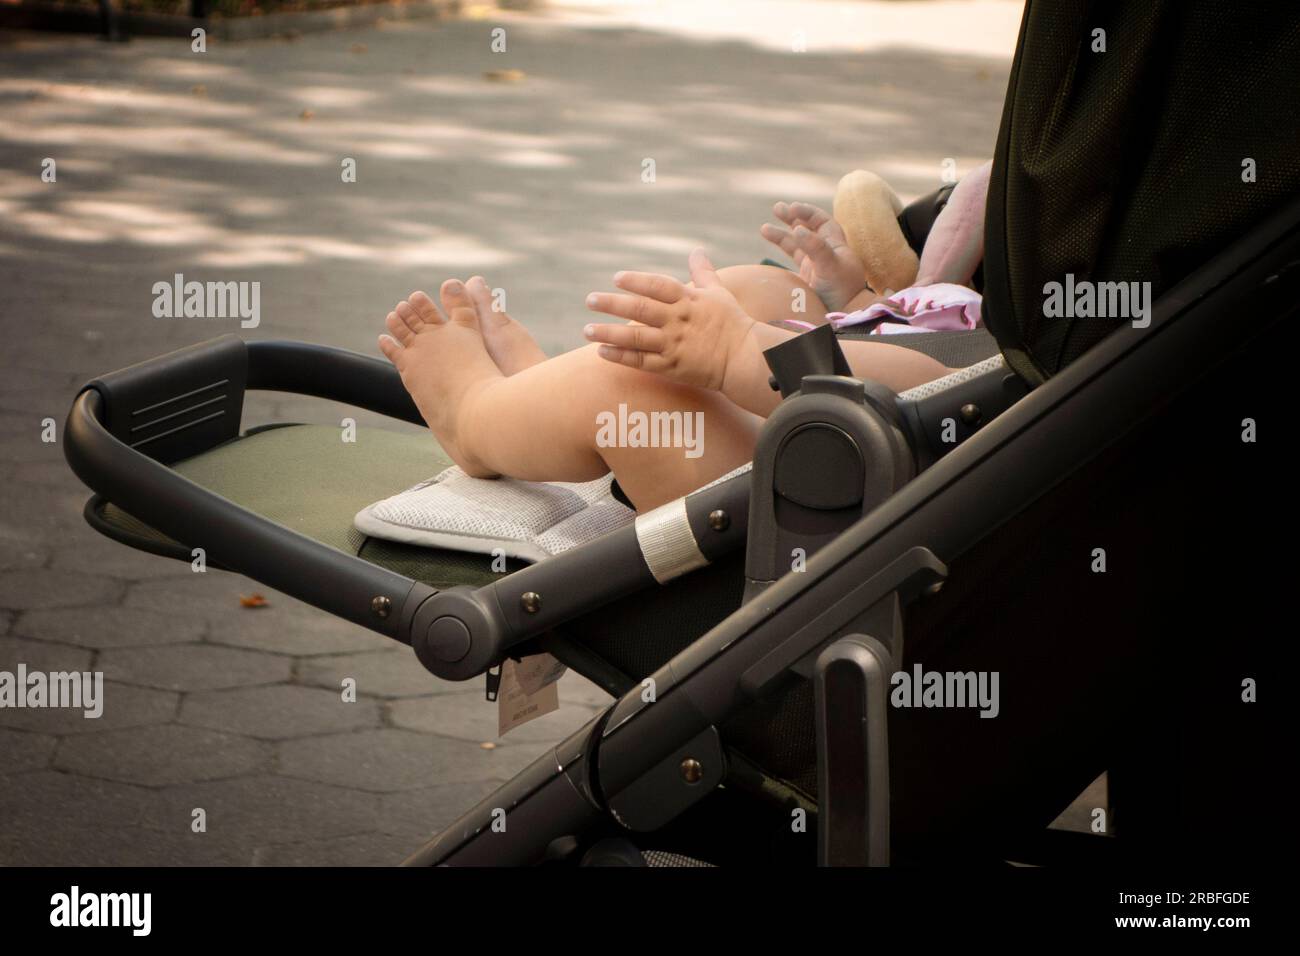 Hands and feet of a little baby in a stroller Stock Photo